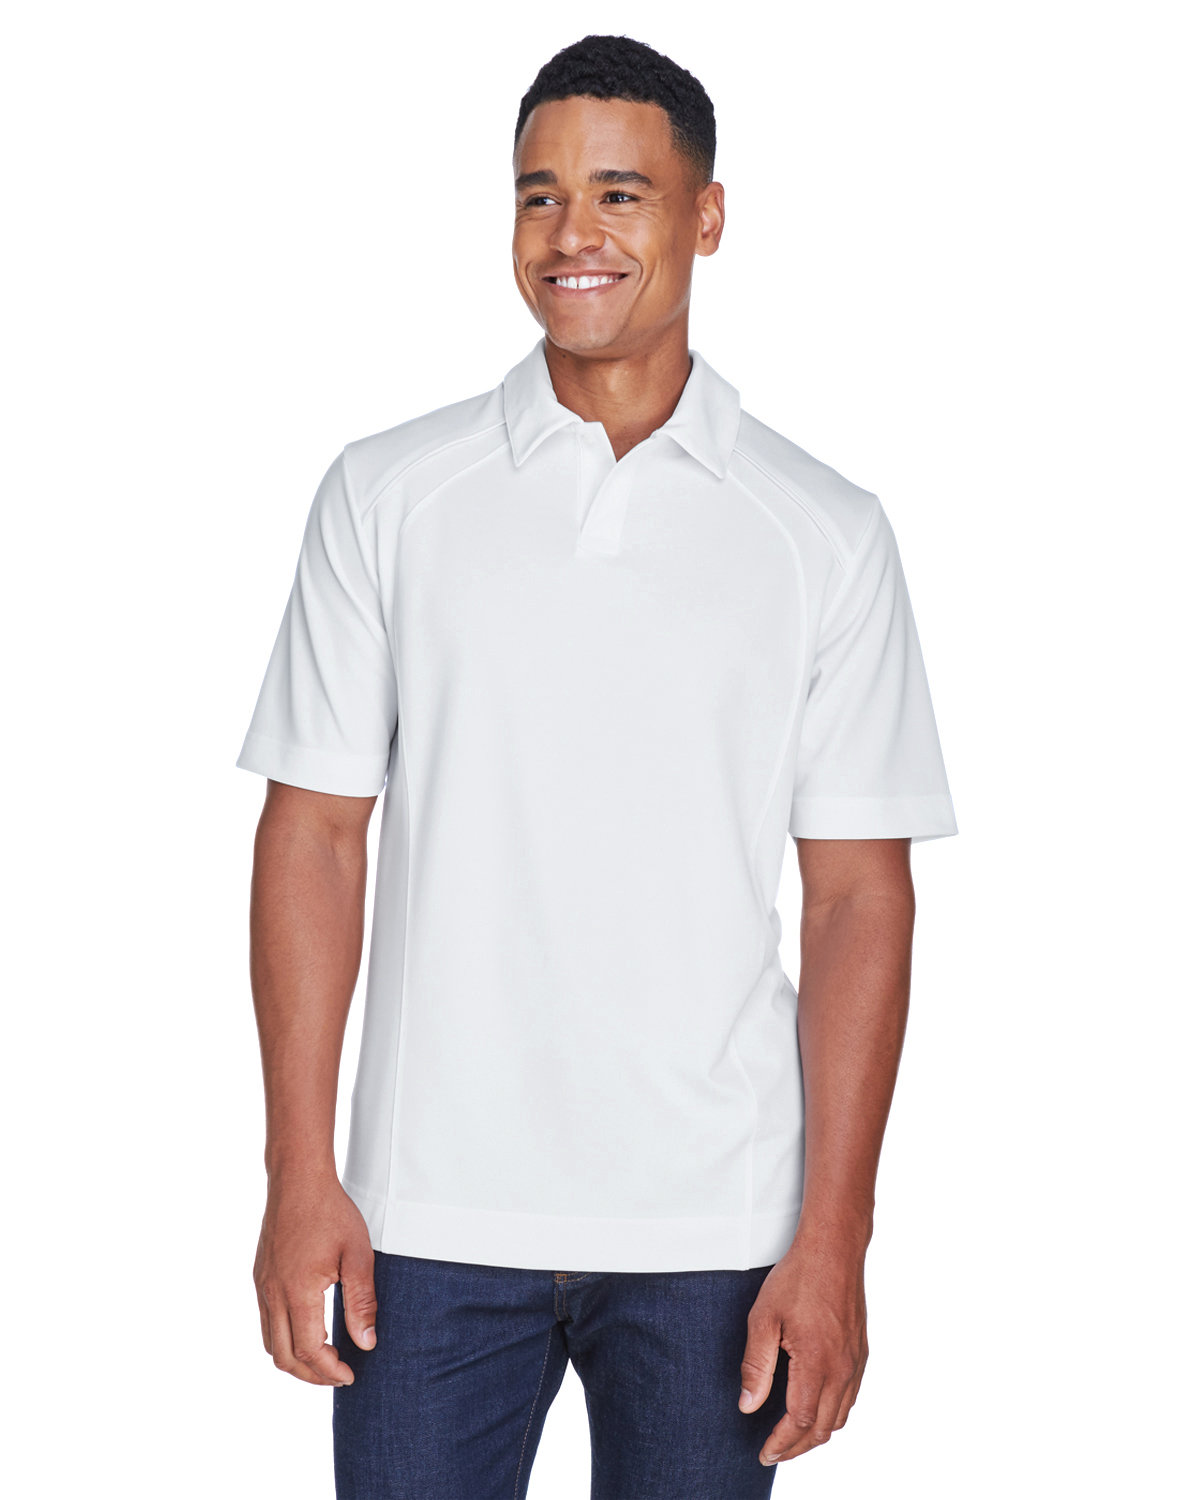 North End Men's Recycled Polyester Performance Piqué Polo WHITE 